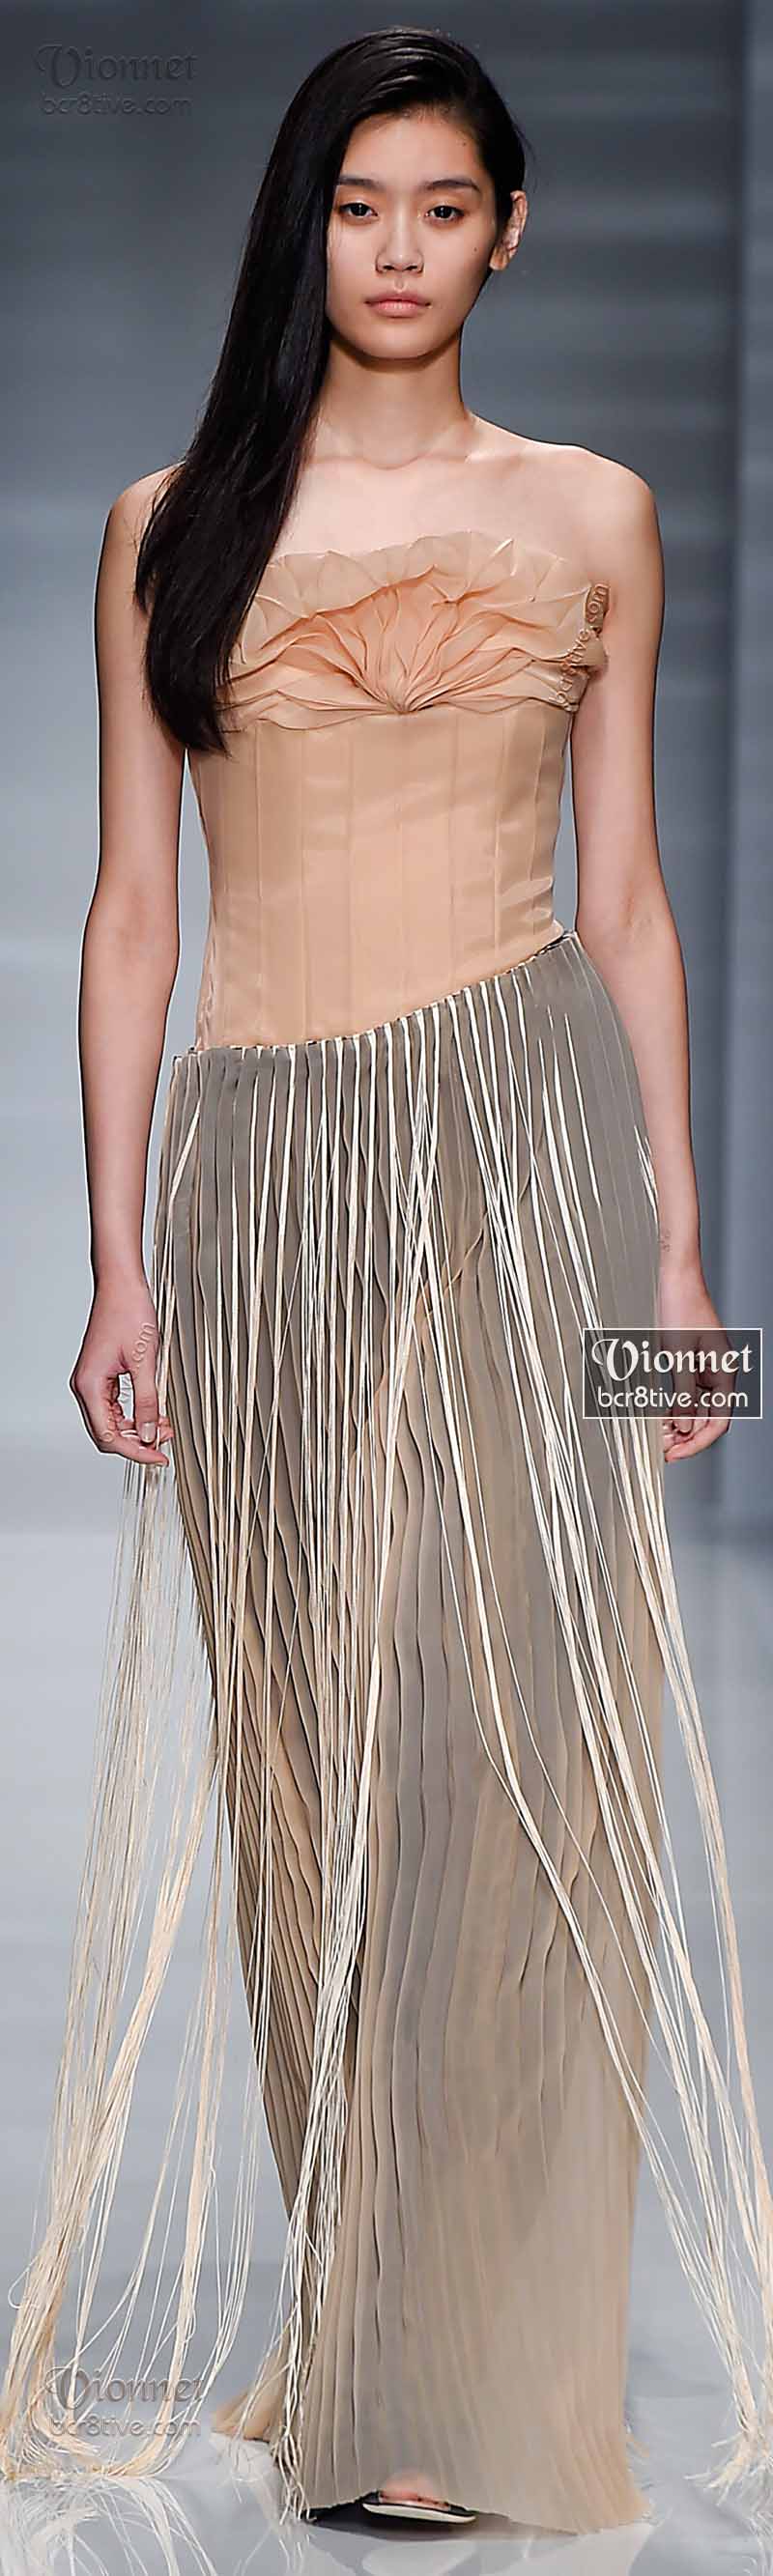 Vionnet Fall Winter 2014-15 Couture – Be Creative